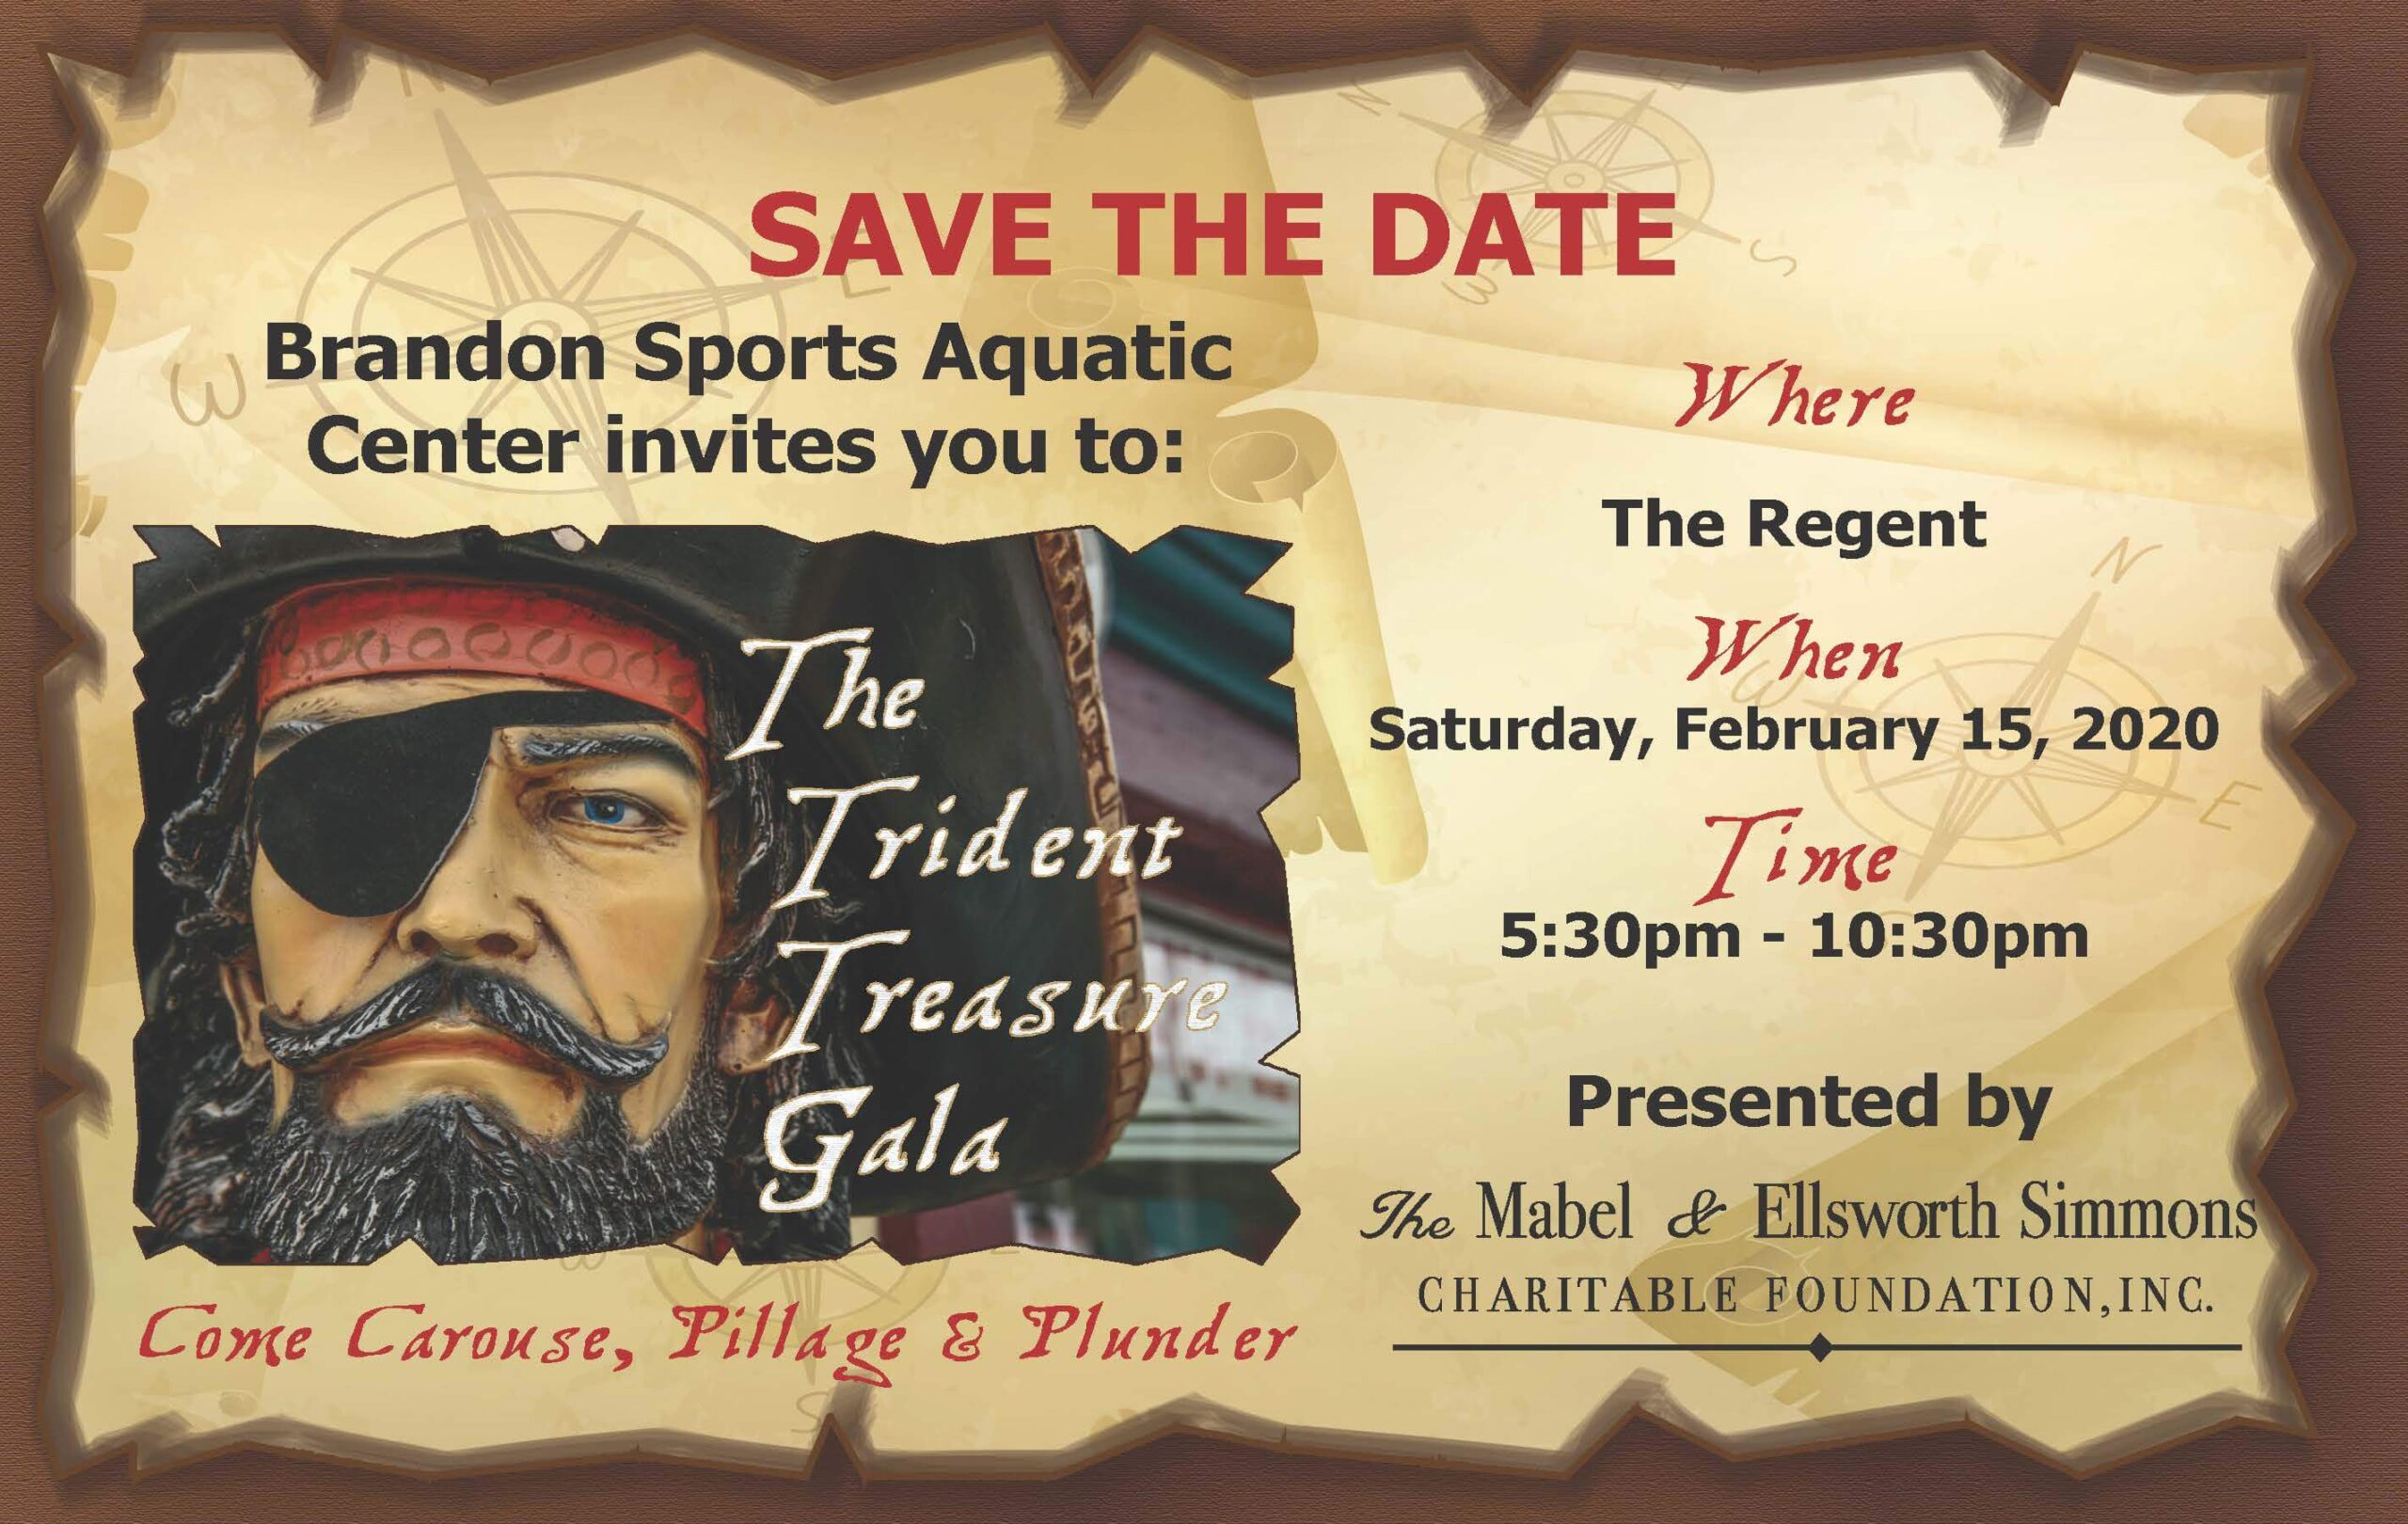 Featured image for “TRIDENT Treasure Gala – February 15 2020”